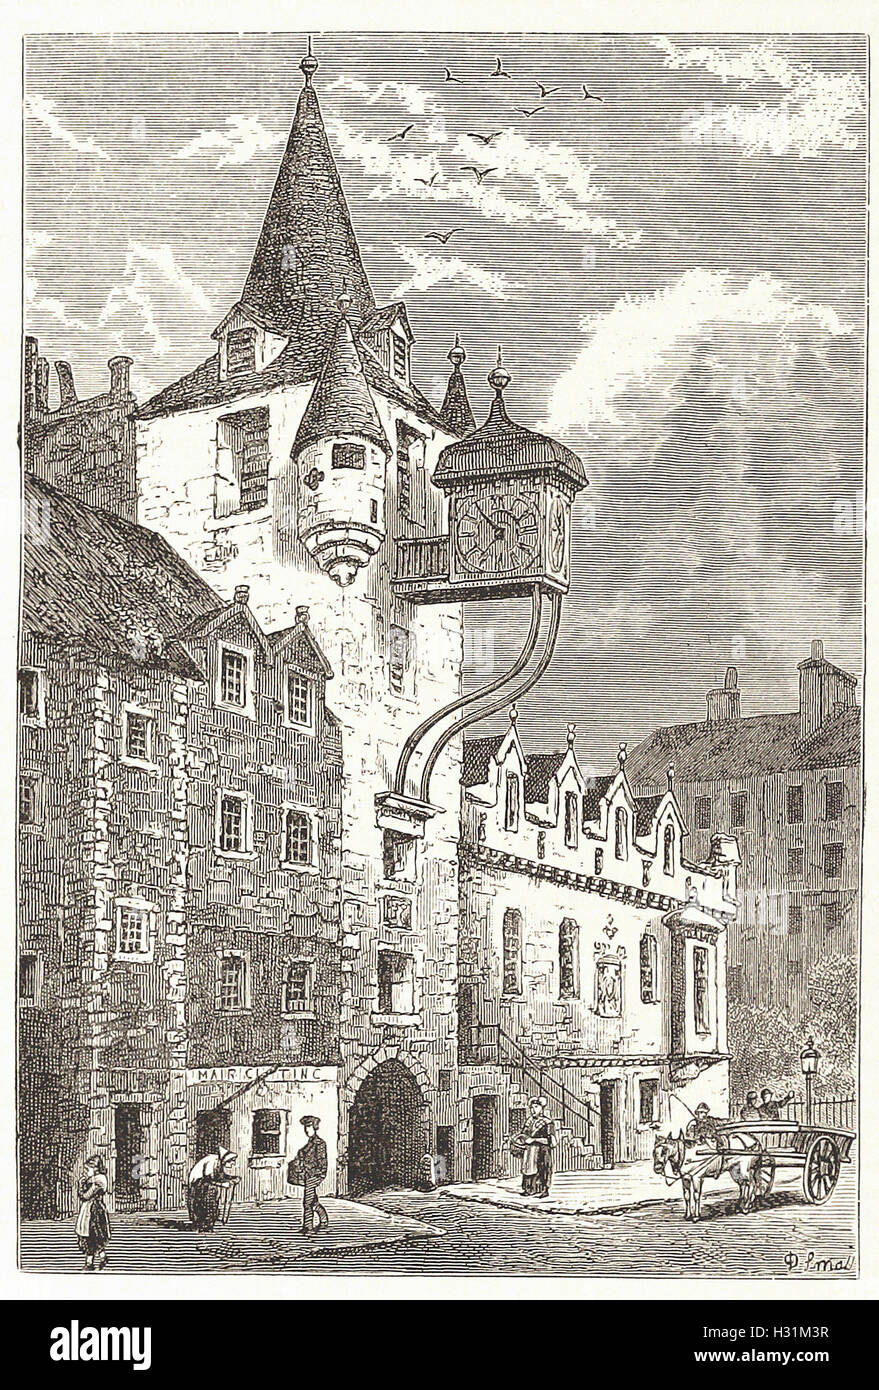 THE CANONGATE TOLBOOTH, EDINBURGH - from 'Cassell's Illustrated Universal History' - 1882 Stock Photo